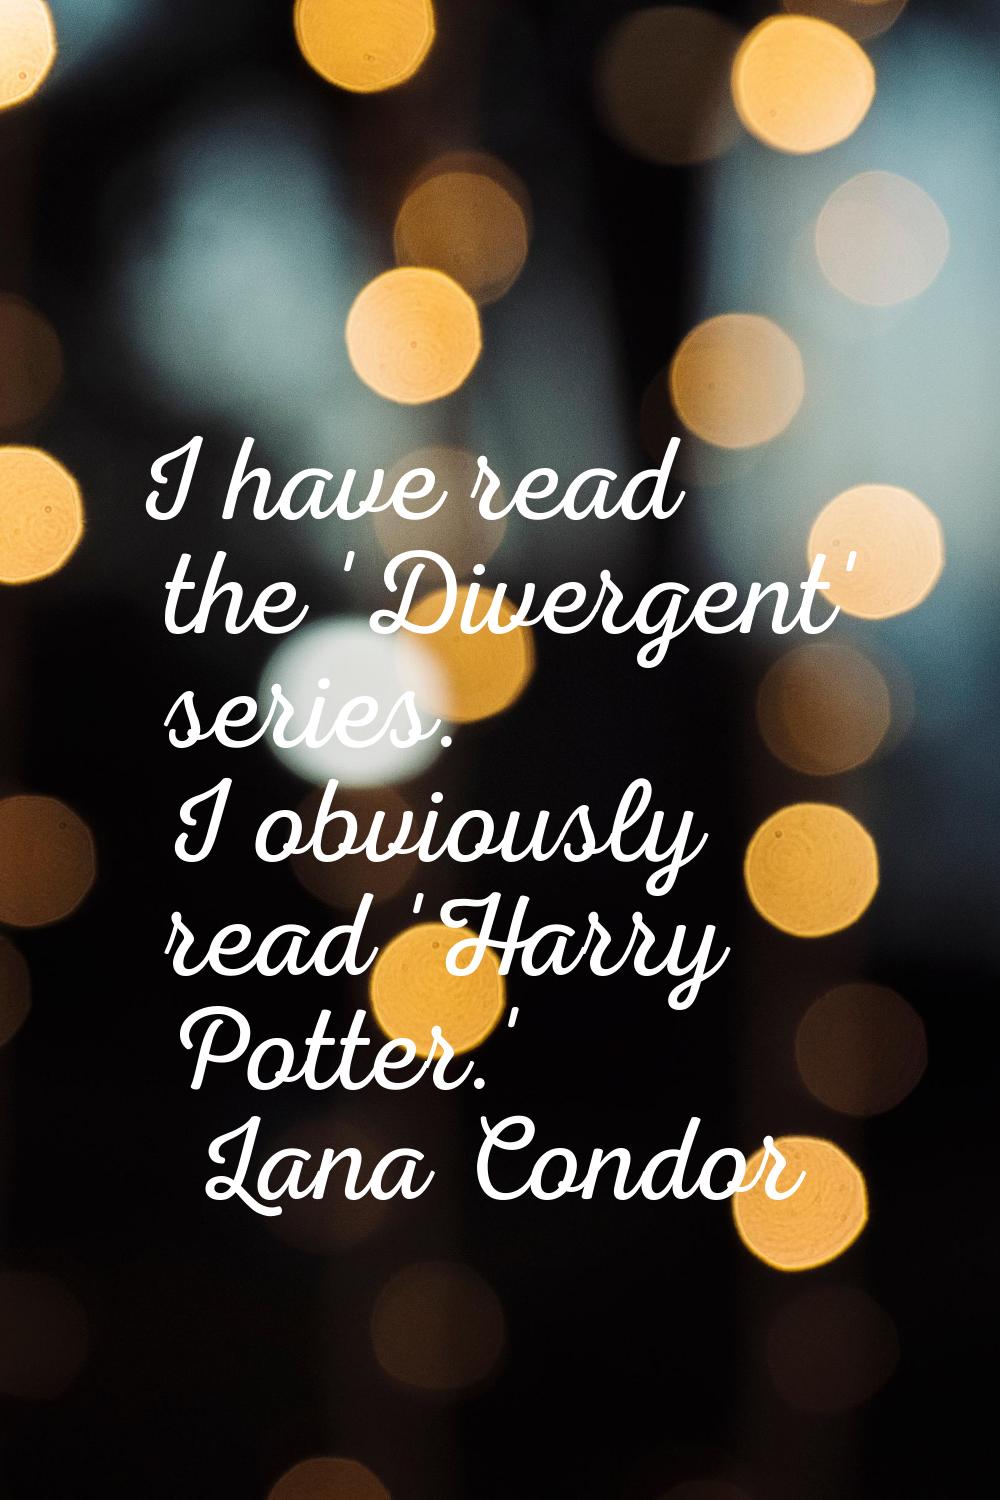 I have read the 'Divergent' series. I obviously read 'Harry Potter.'